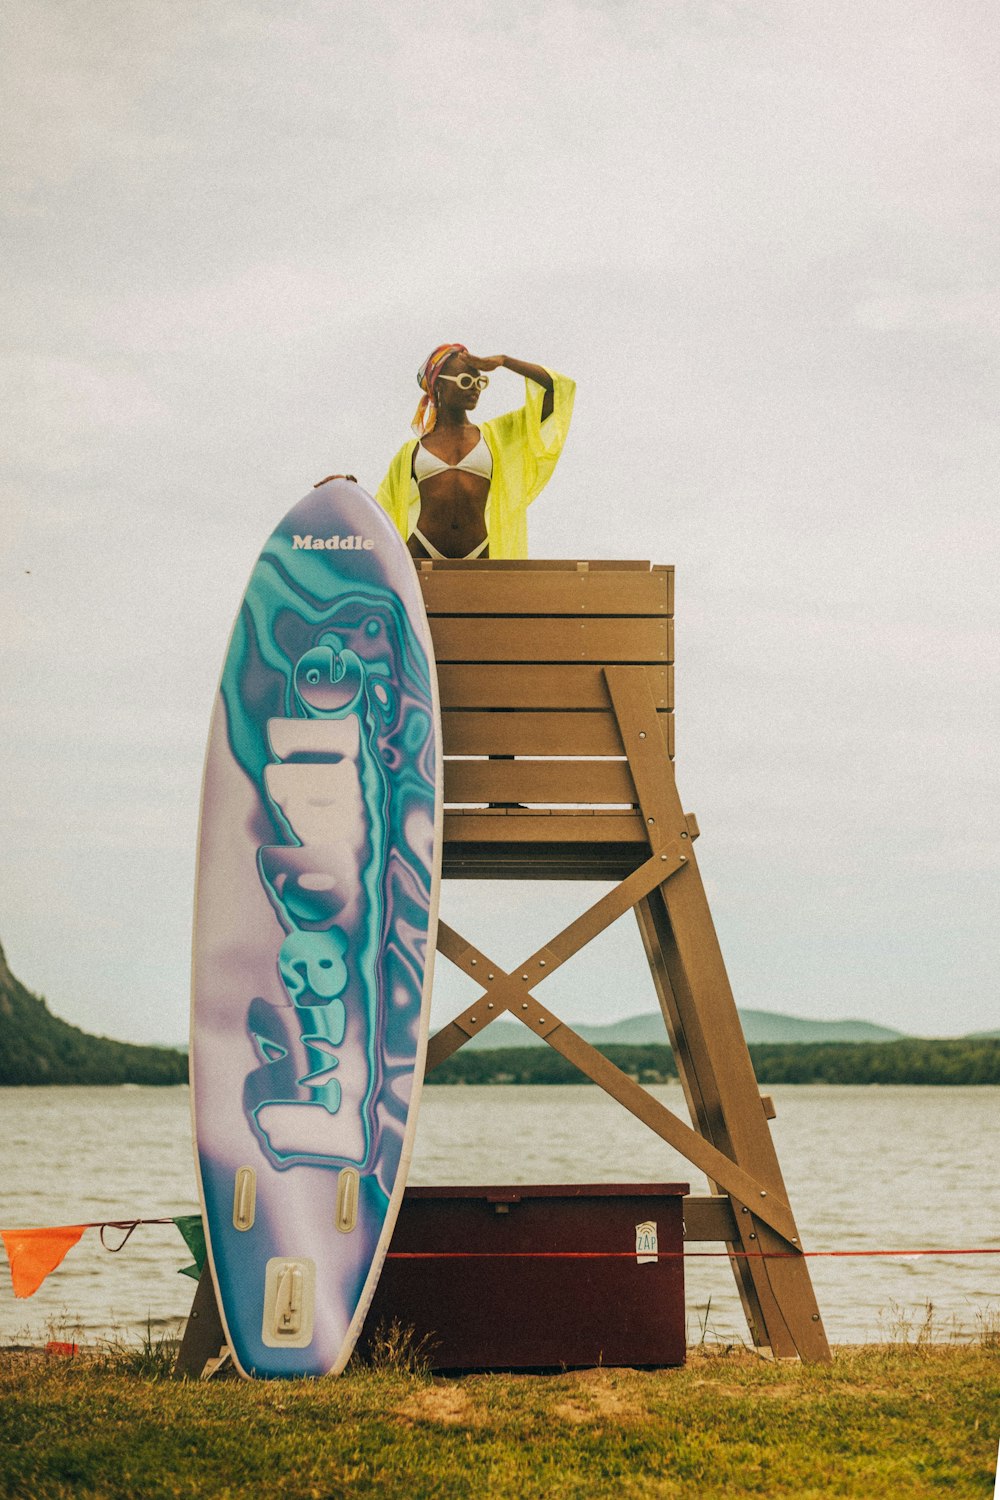 a person stands on a surfboard